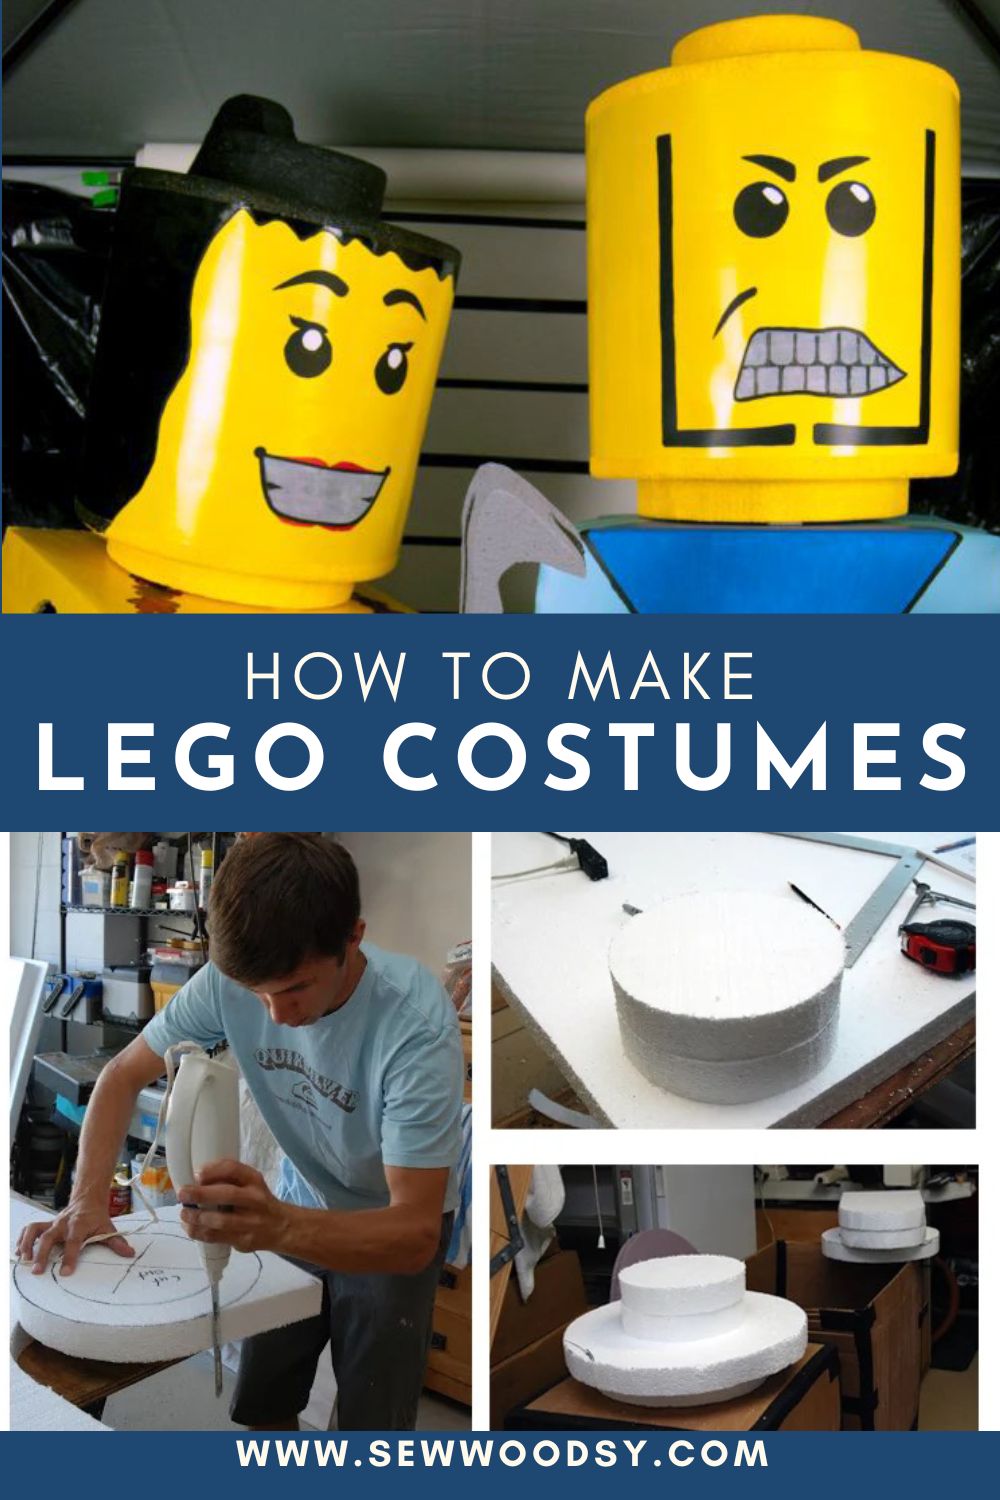 Man and female lego divided by text on image for Pinterest with a man carving foam and 2 other photos of foam circles.